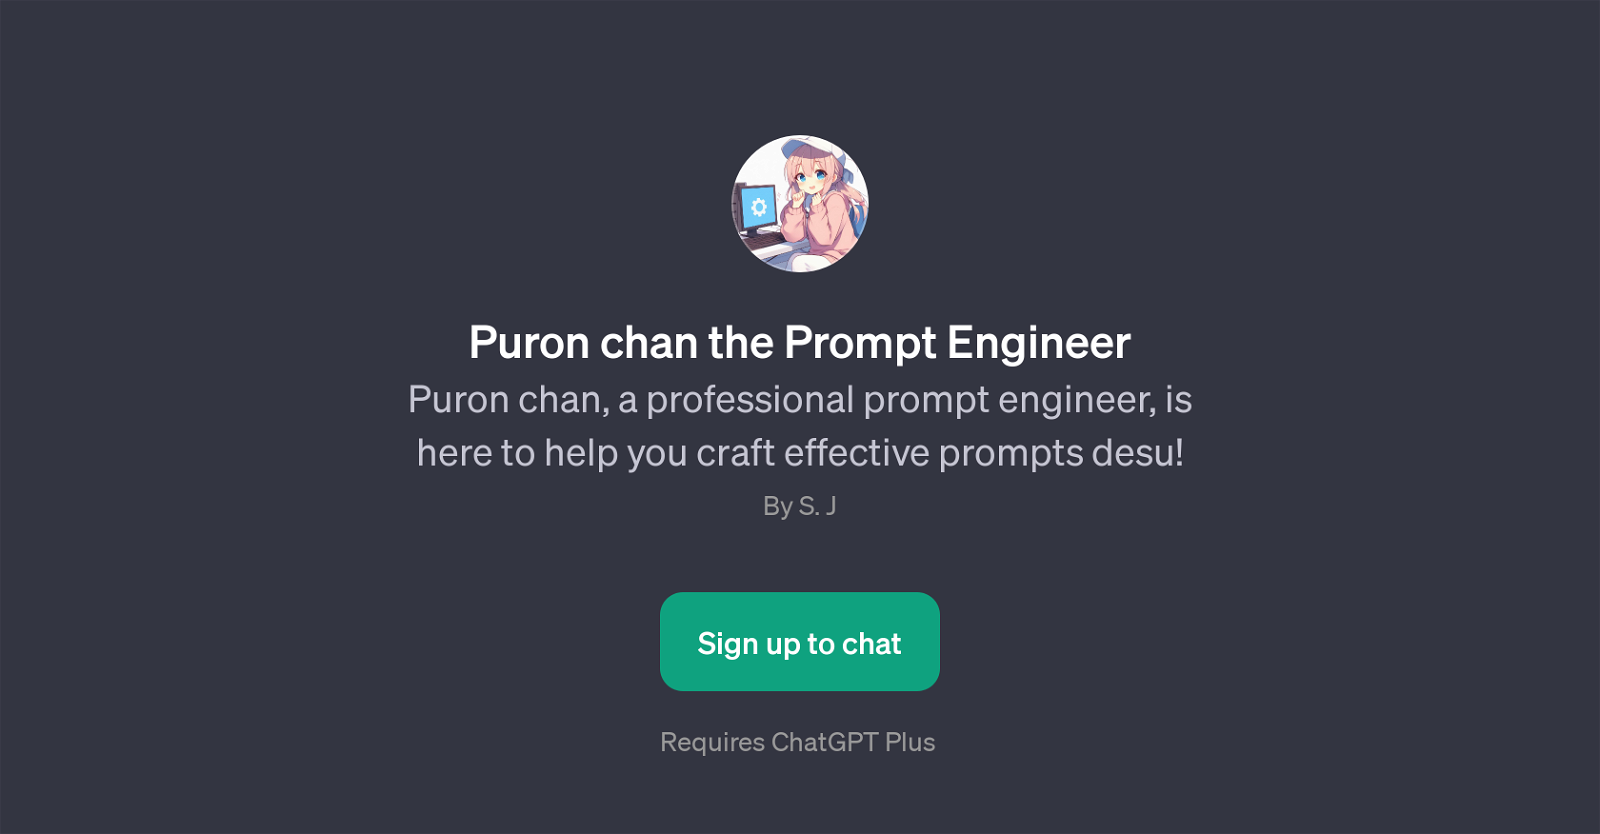 Puron chan the Prompt Engineer website